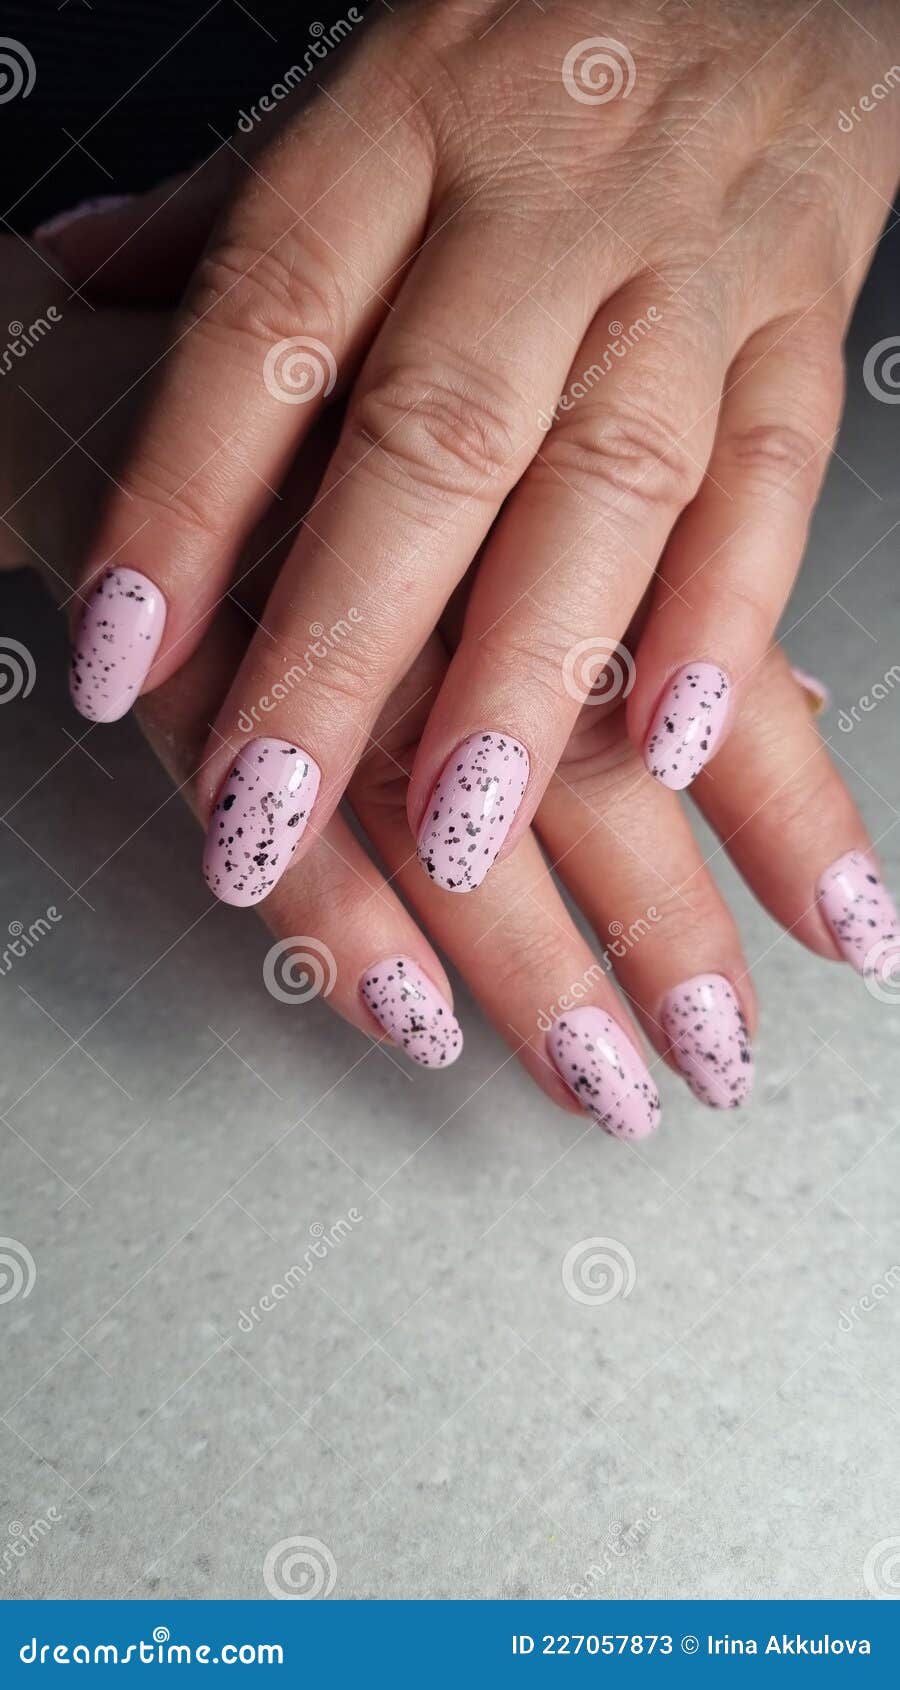 Manicure with Gel Polish and Black Flakes Design Stock Image ...